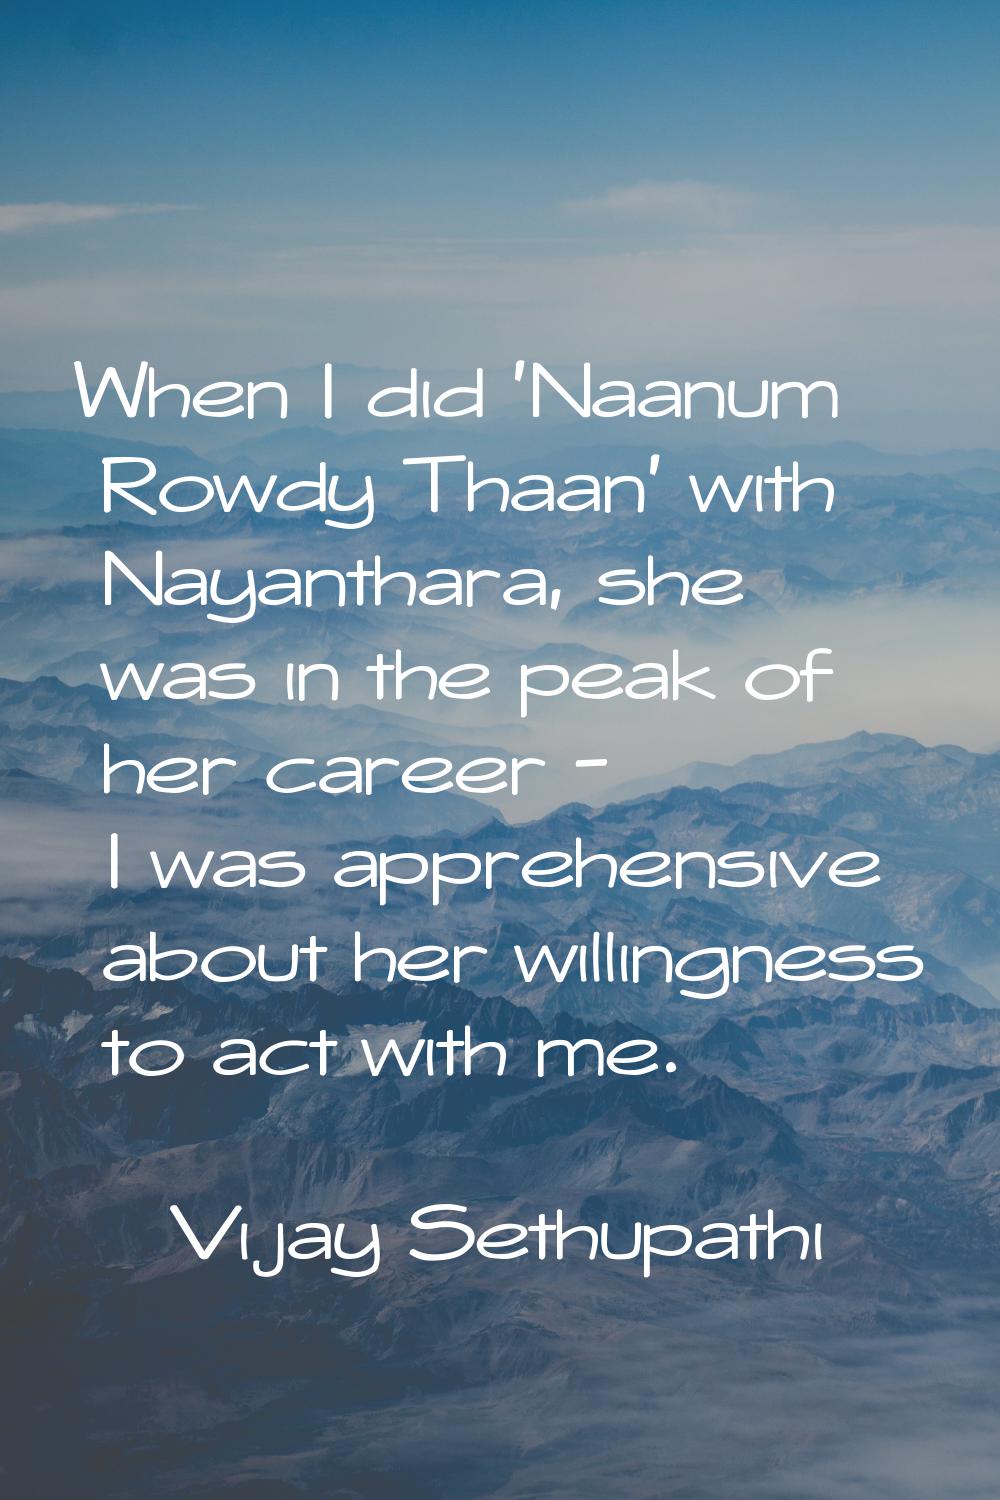 When I did 'Naanum Rowdy Thaan' with Nayanthara, she was in the peak of her career - I was apprehen